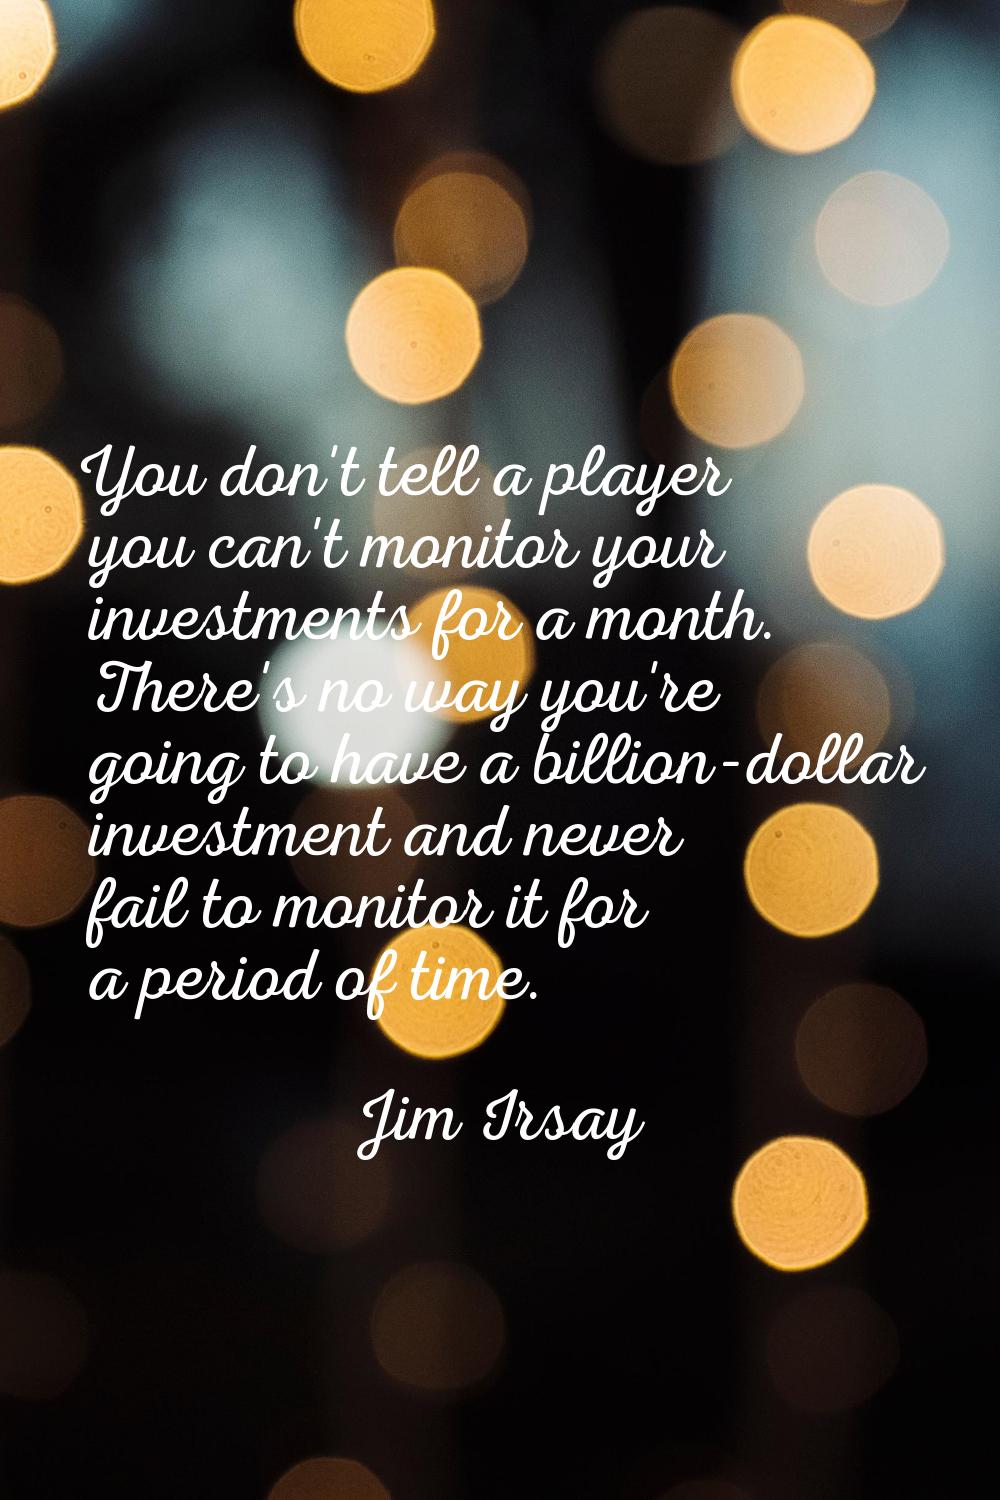 You don't tell a player you can't monitor your investments for a month. There's no way you're going